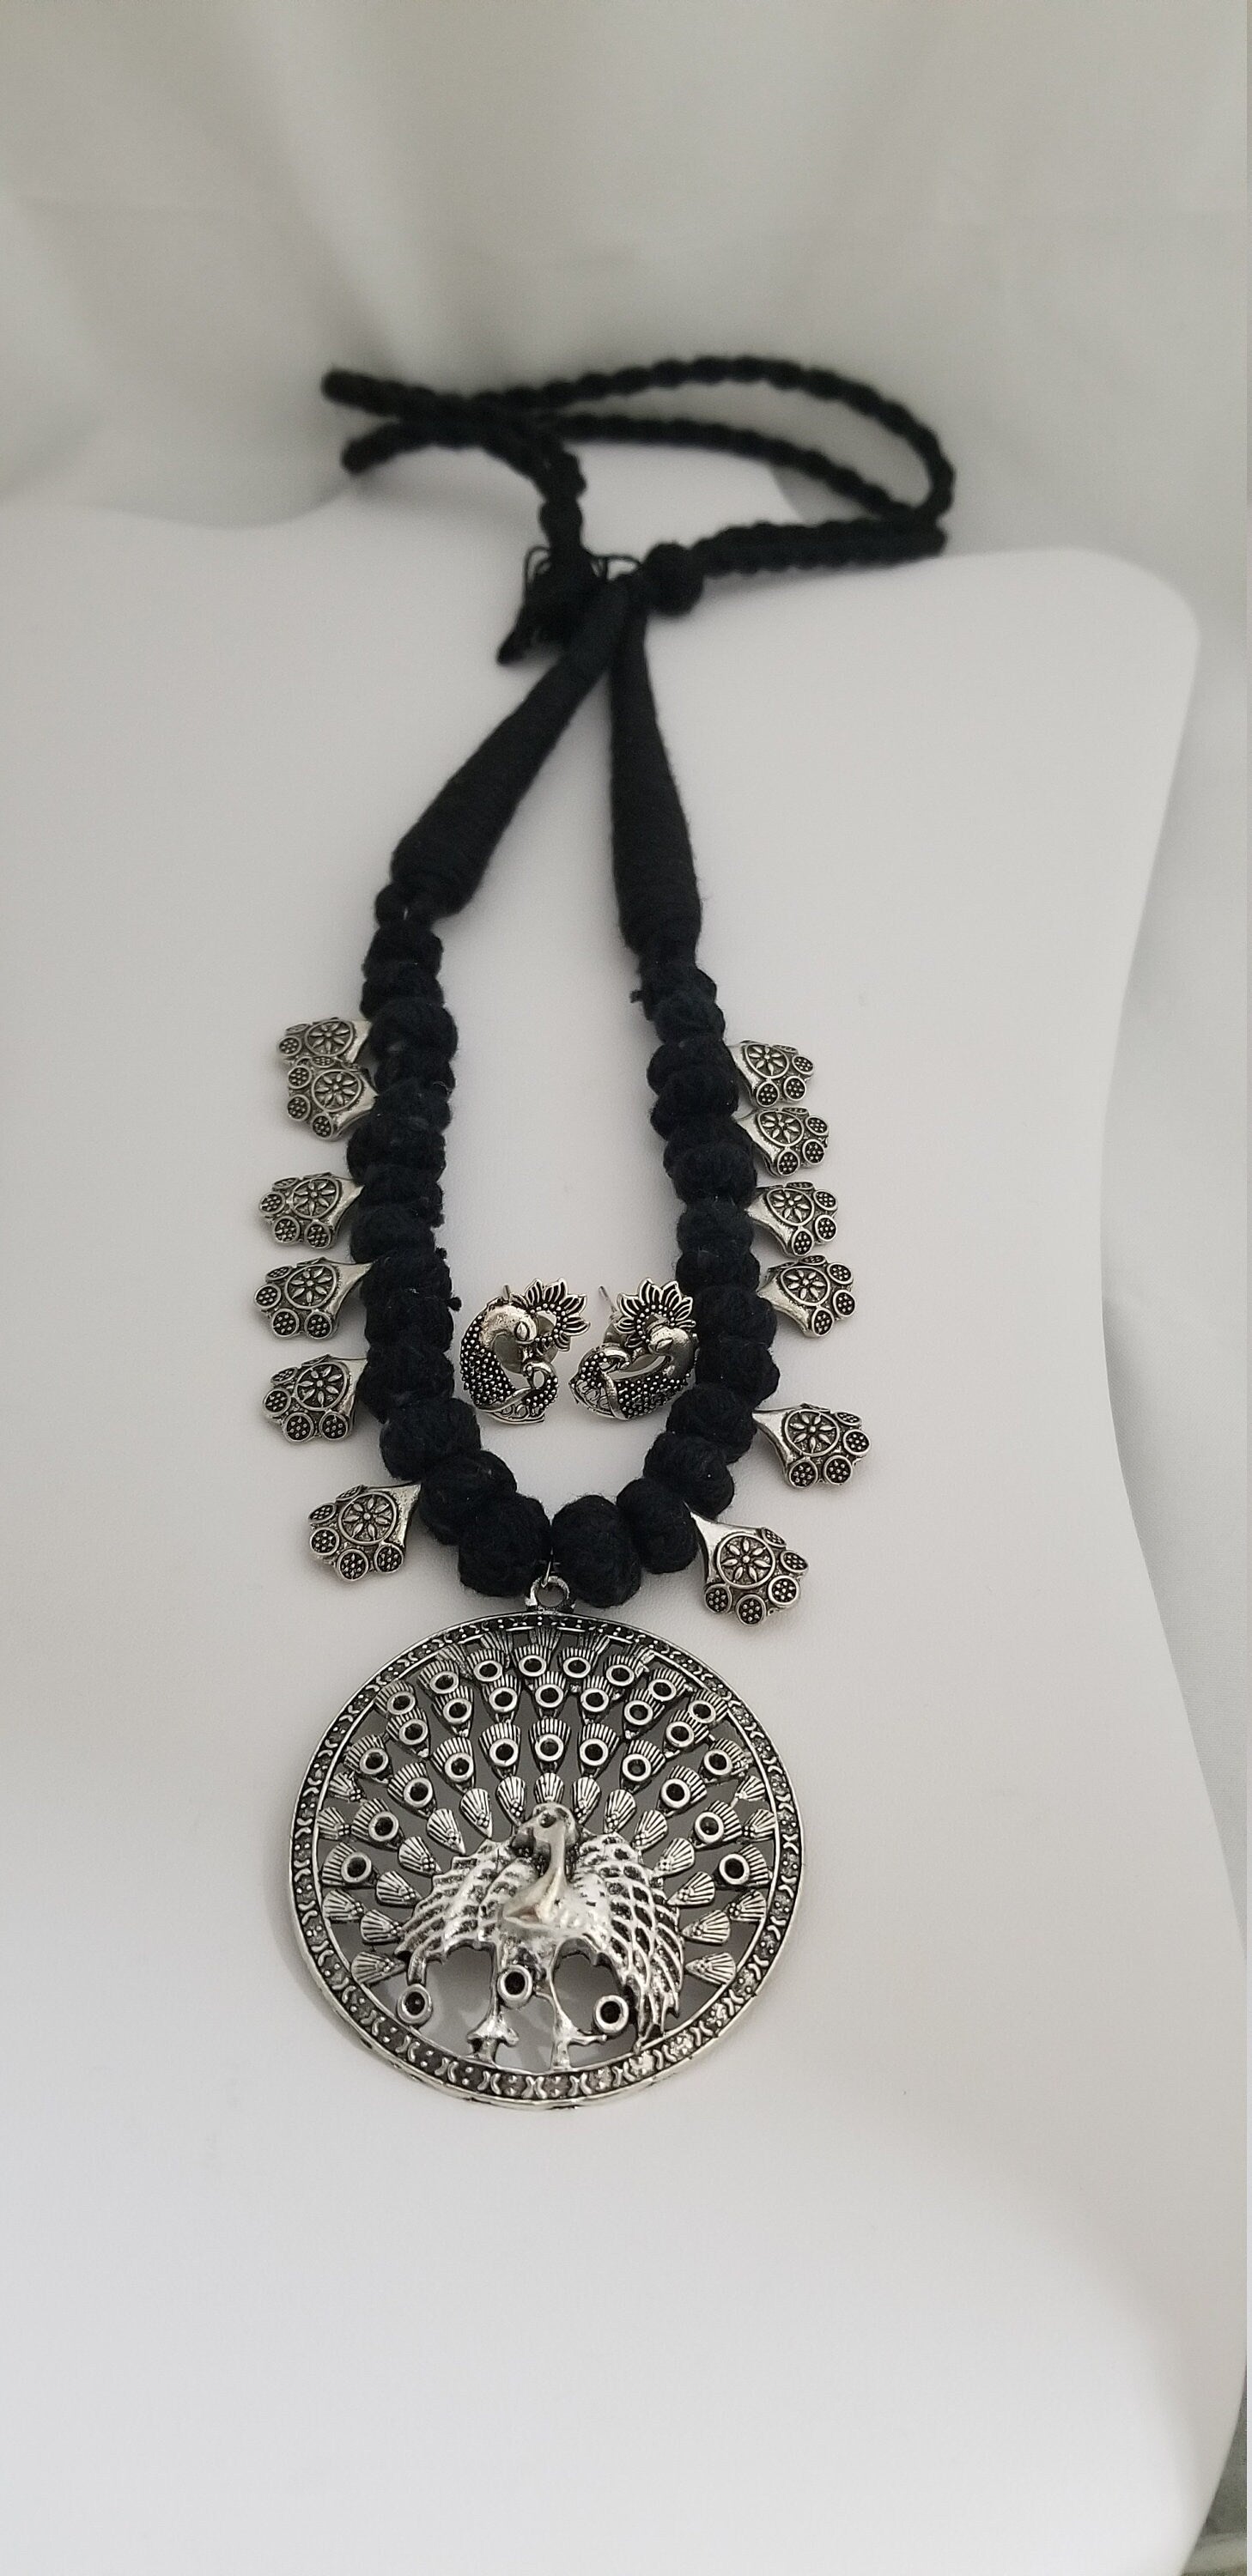 Antique Silver Peacock Pendent with Thread bead chain with Peacock Earrings - Ethnic Jewelry